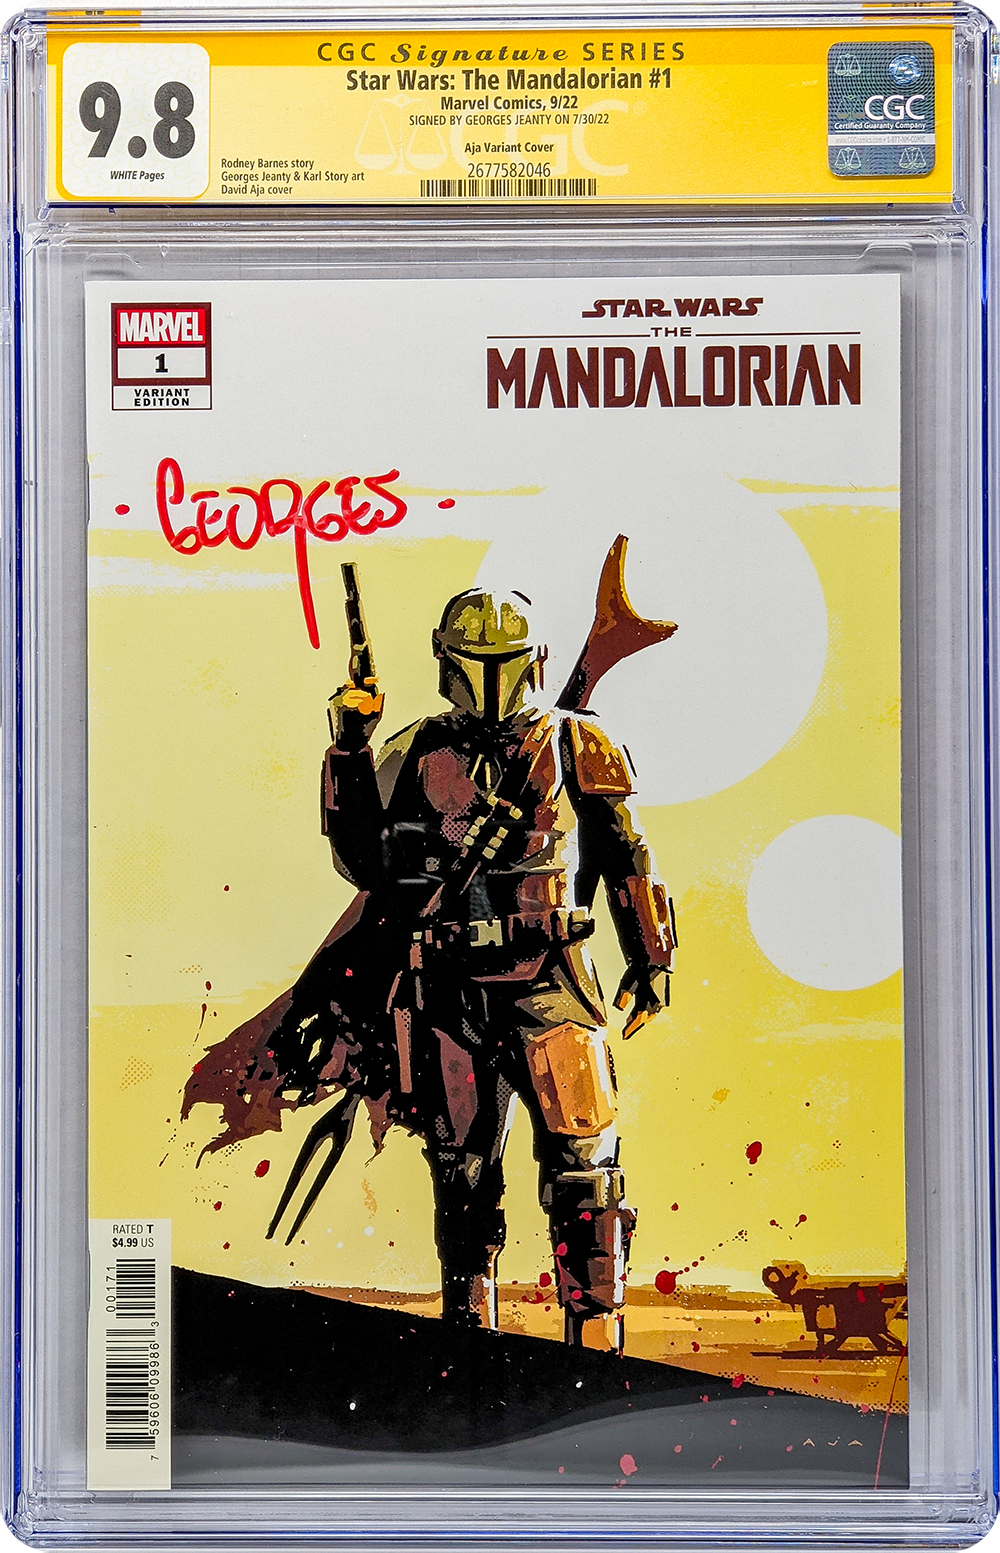 Star Wars: The Mandalorian #1 Aja 1:25 Variant Cover CGC Signature Series 9.8 Signed Georges Jeanty GalaxyCon